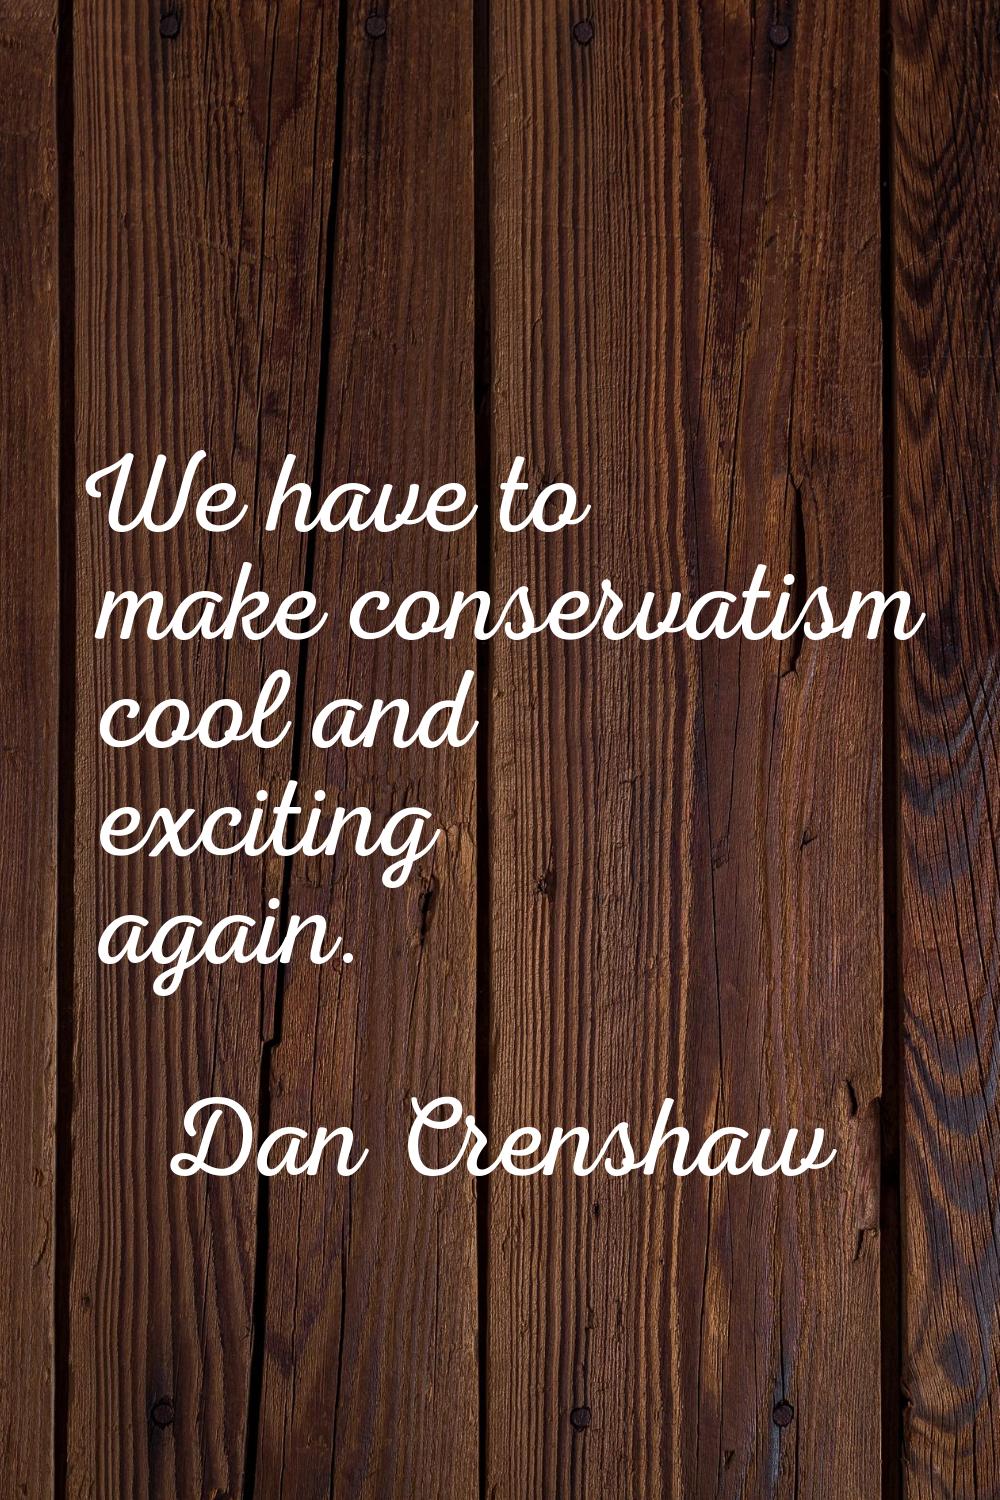 We have to make conservatism cool and exciting again.